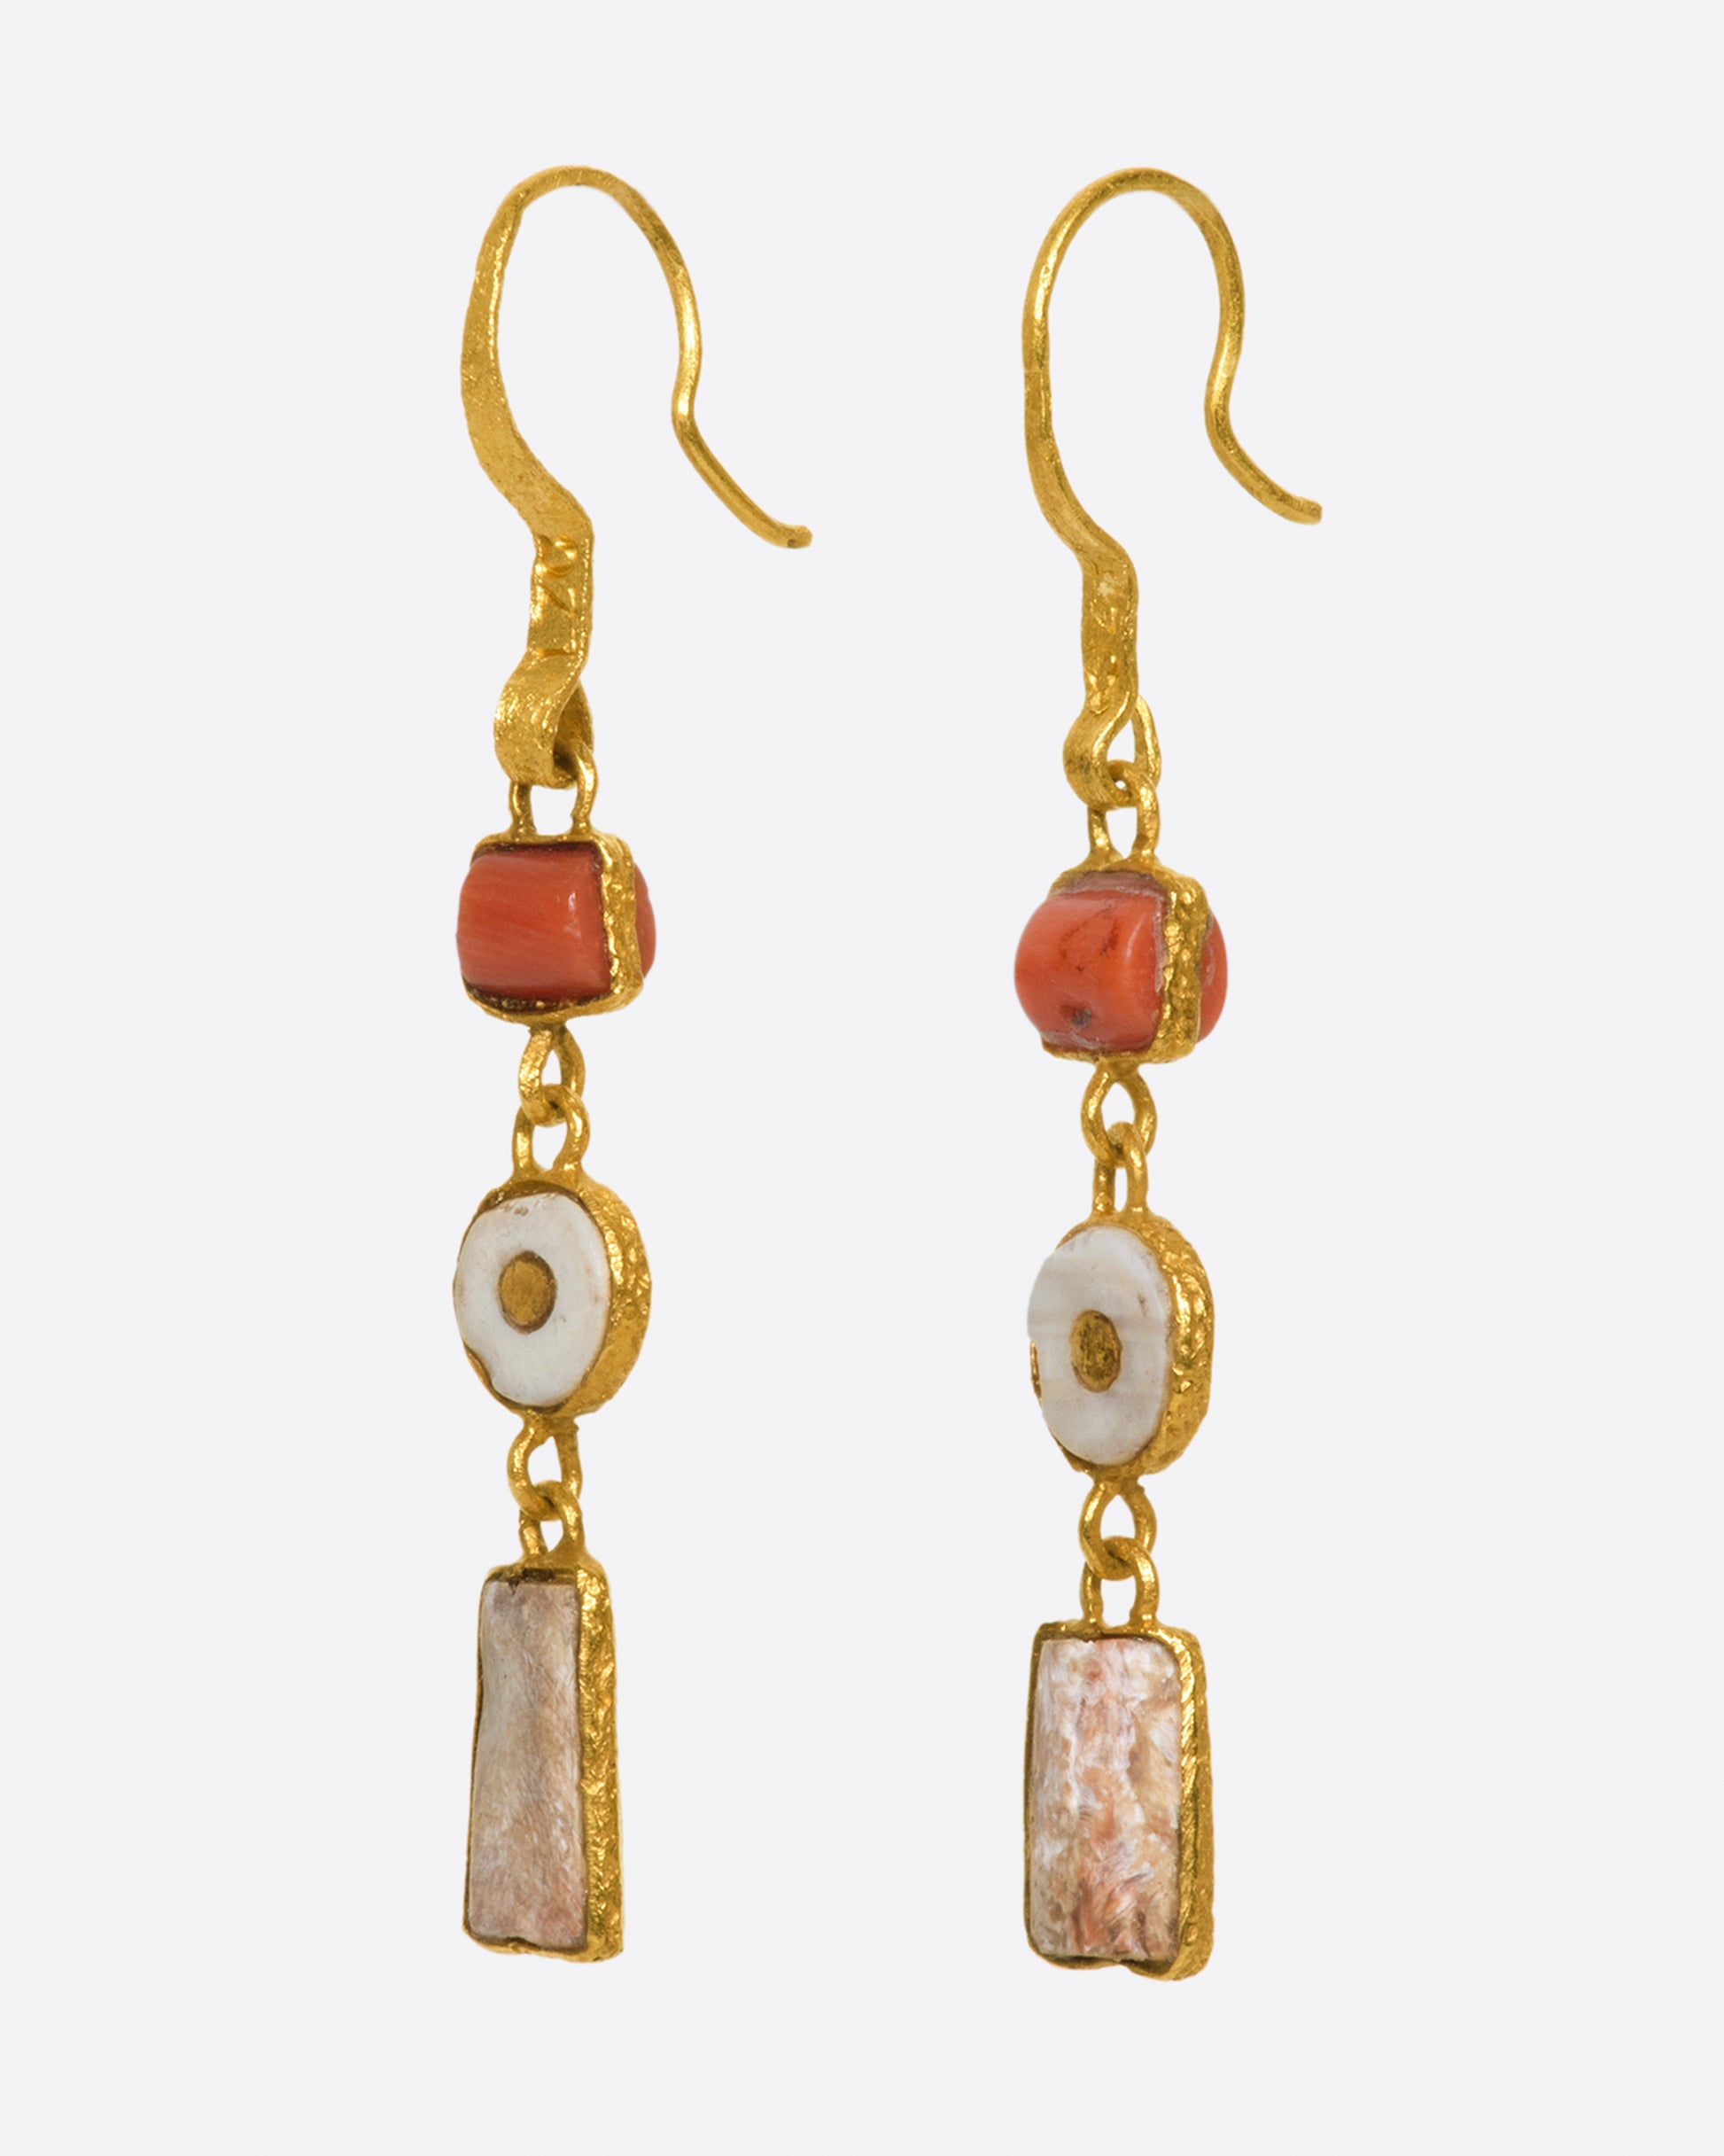 A pair of high karat gold triple drop earrings with coral and clay fragments